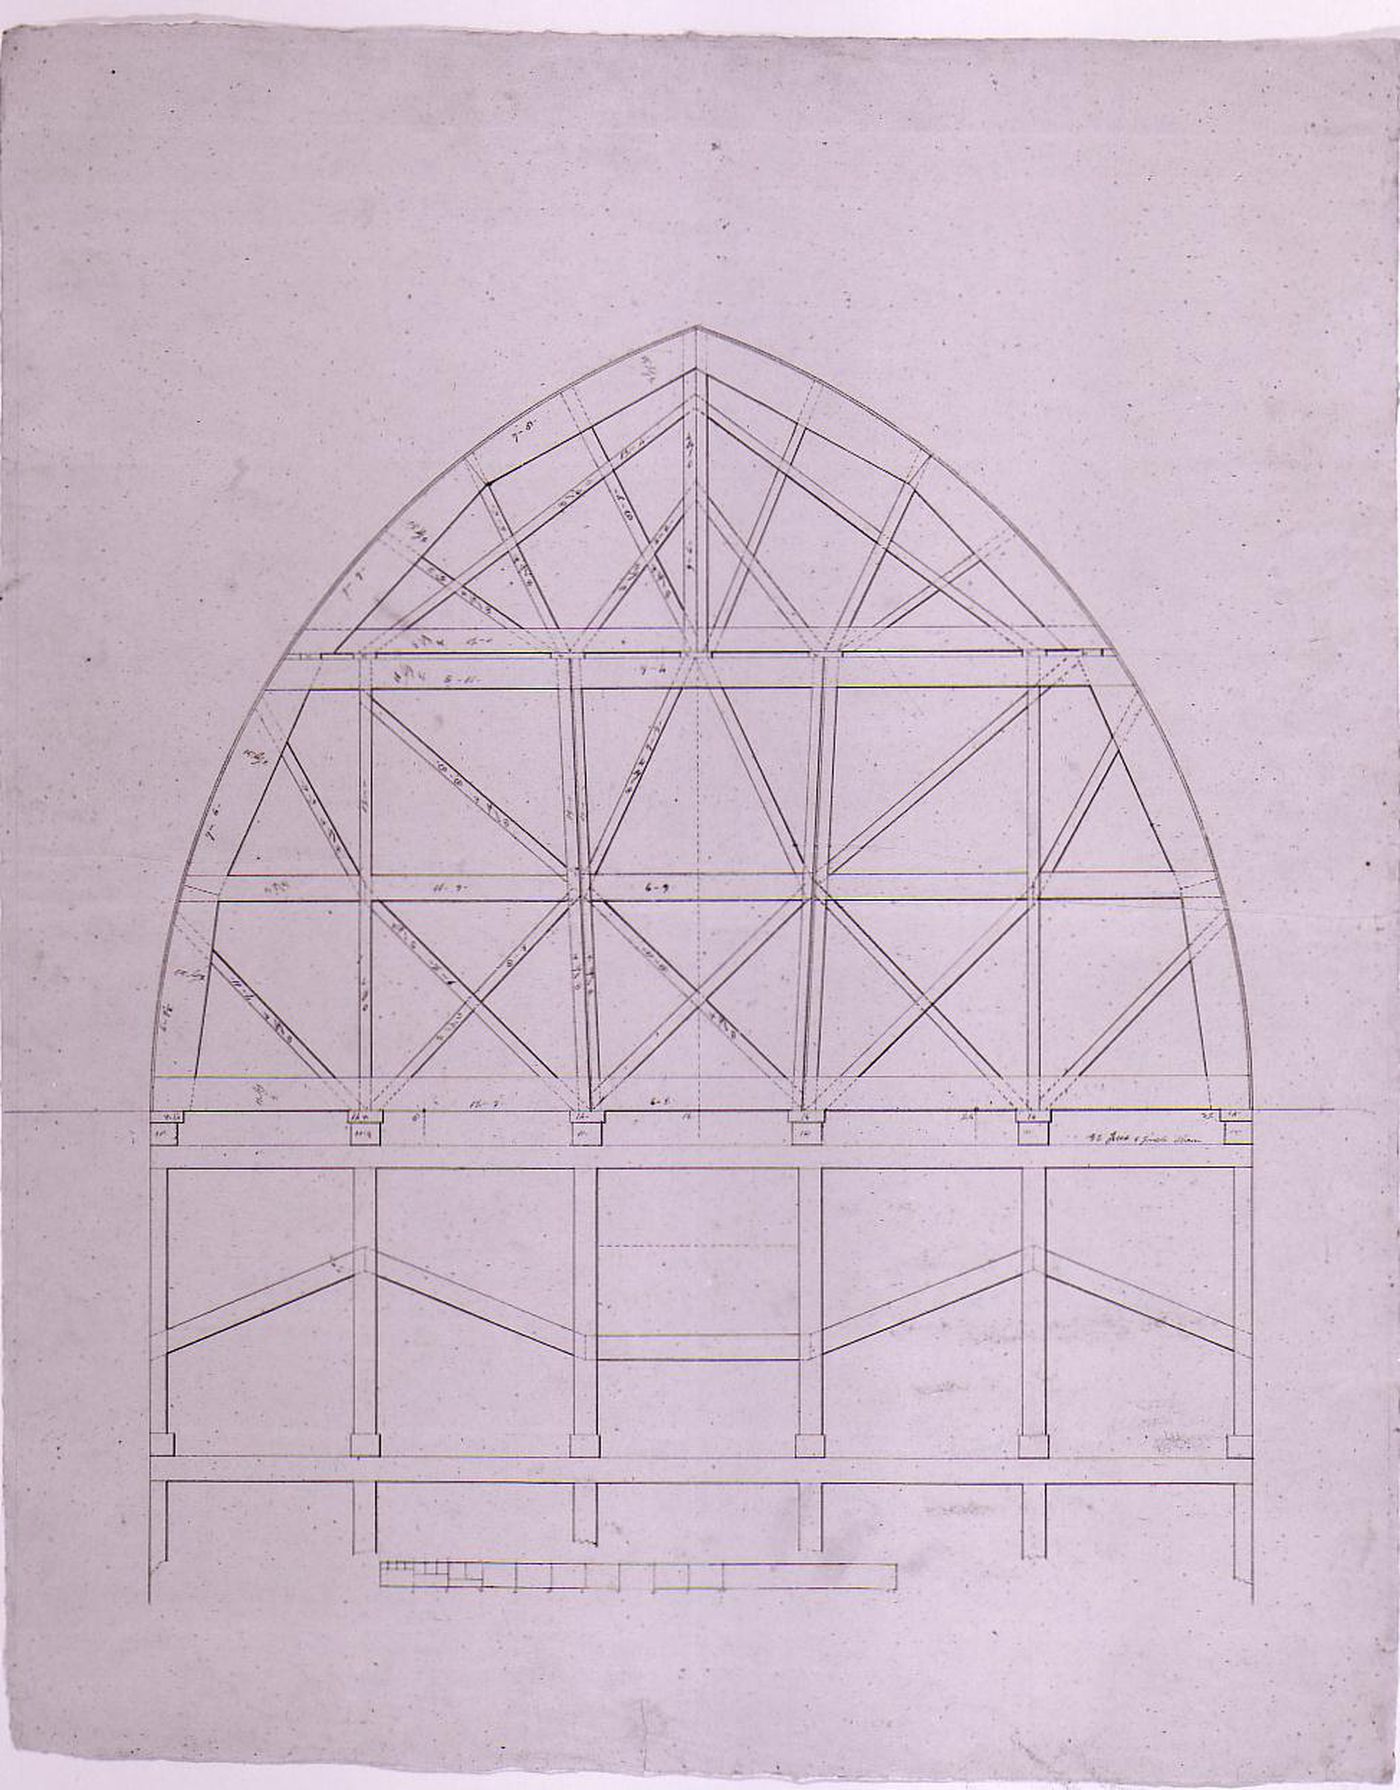 Structural drawing showing the trusses for the altar wall window for Notre-Dame de Montréal